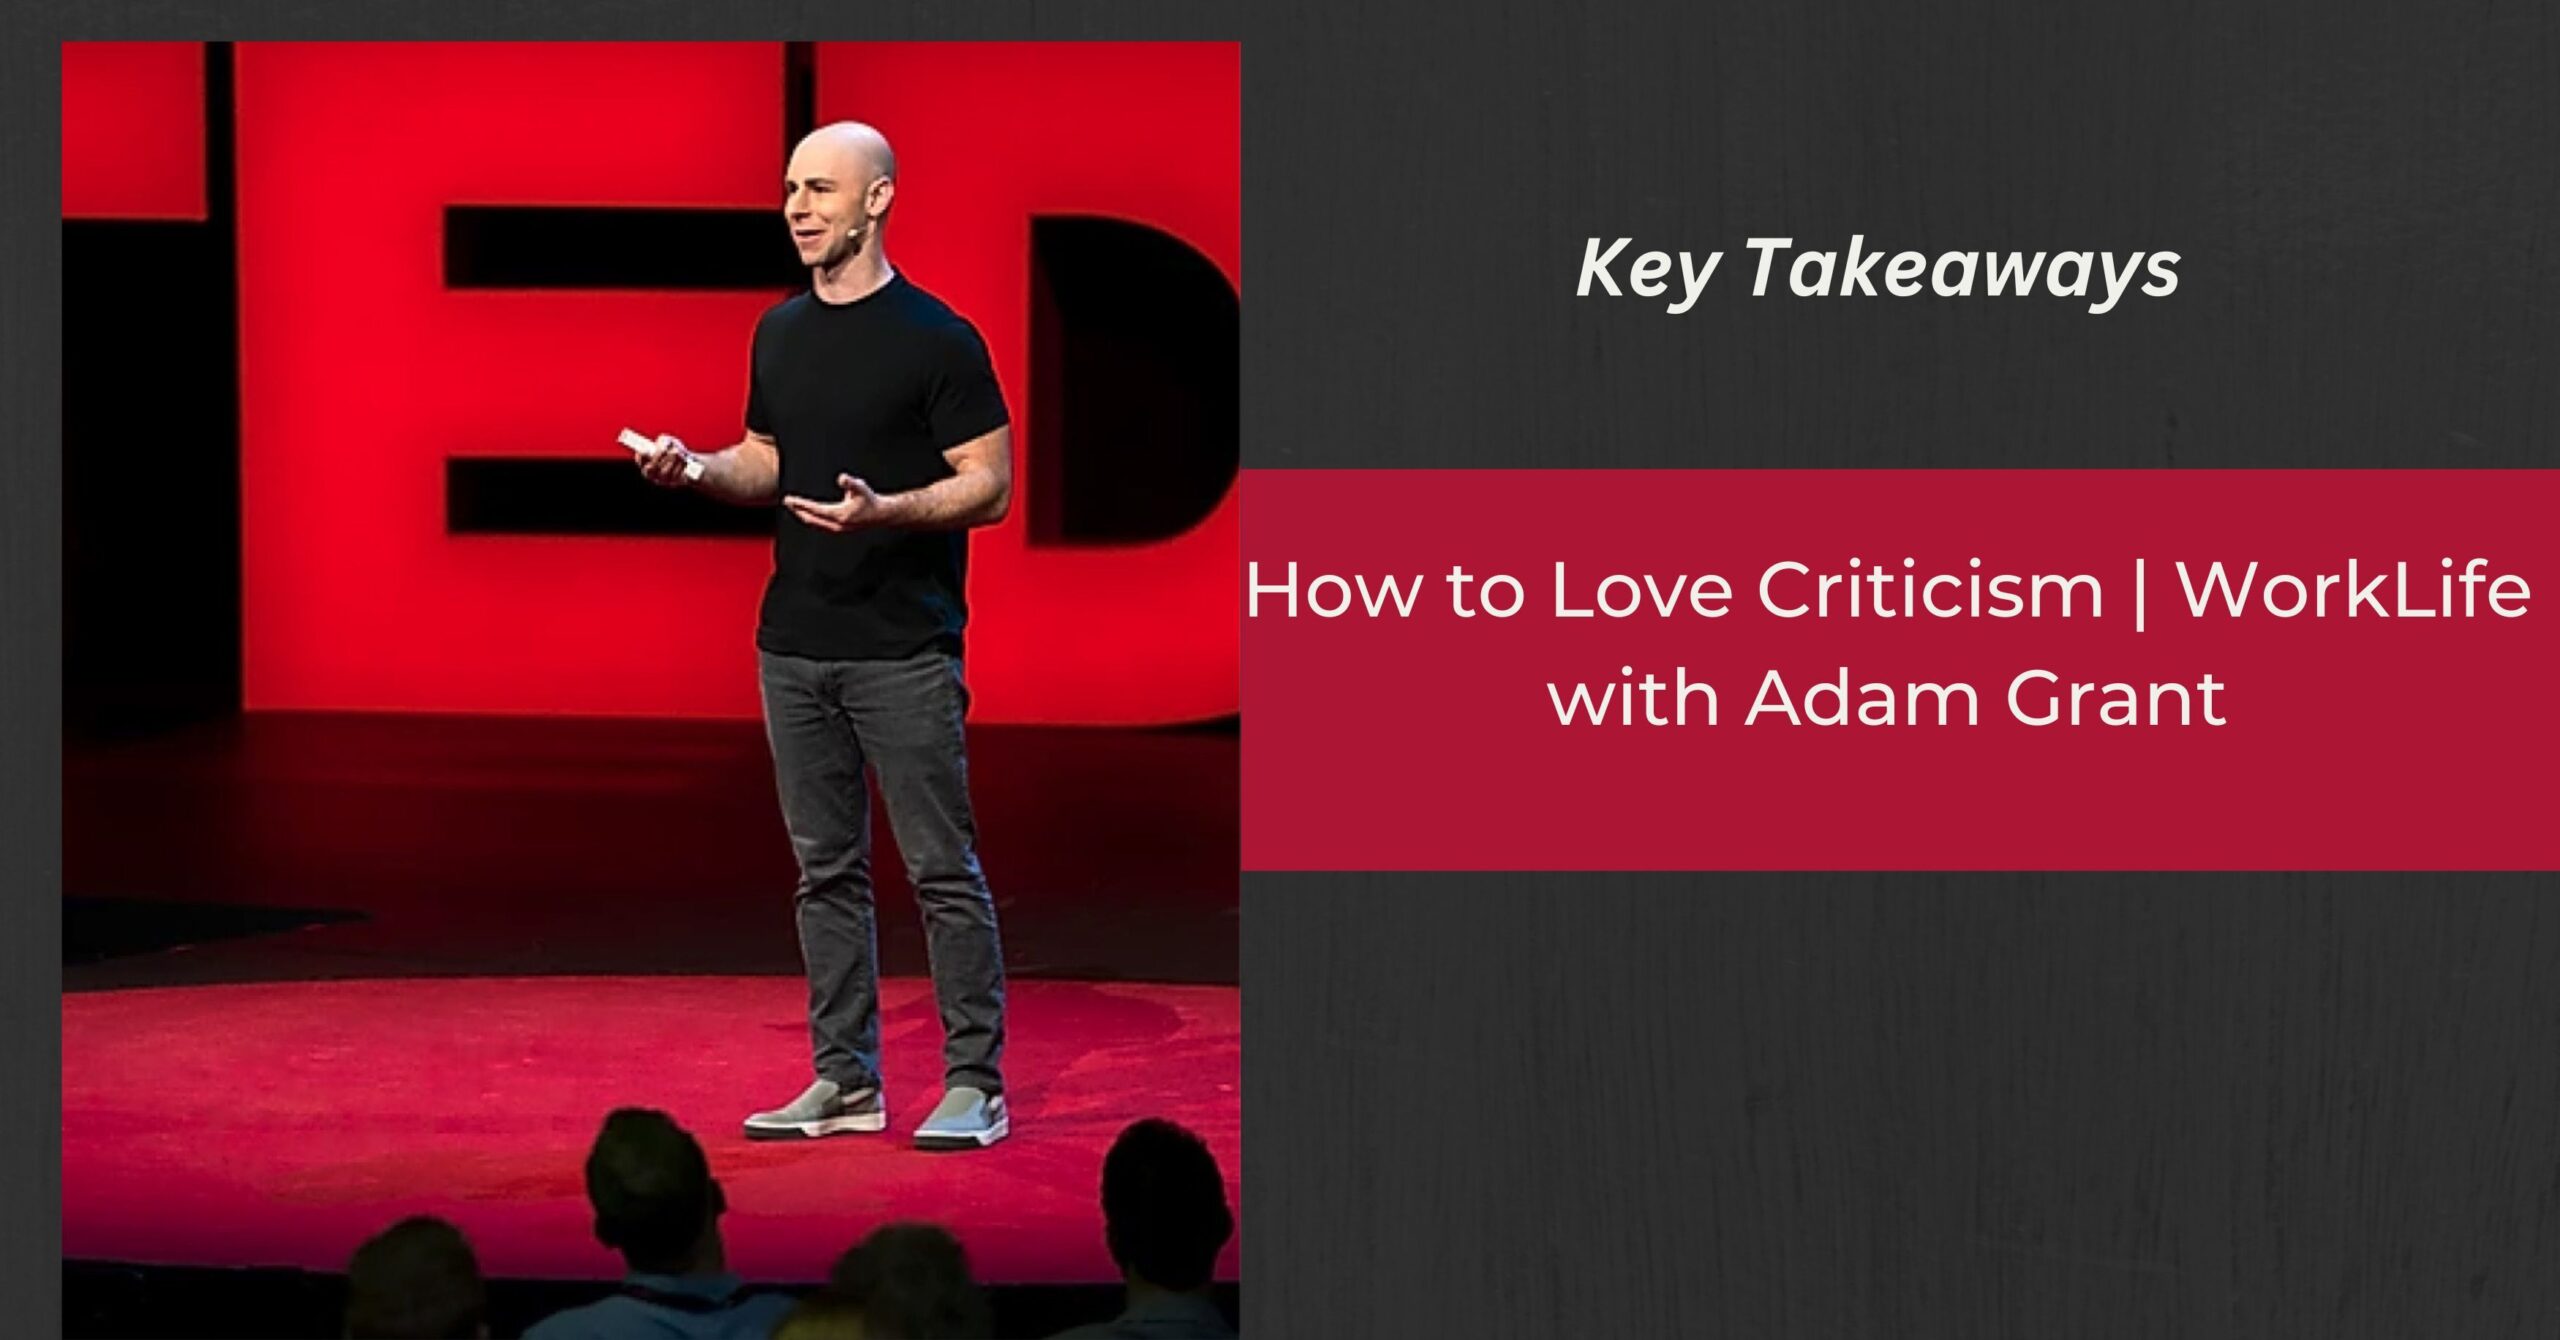 How to Love Criticism